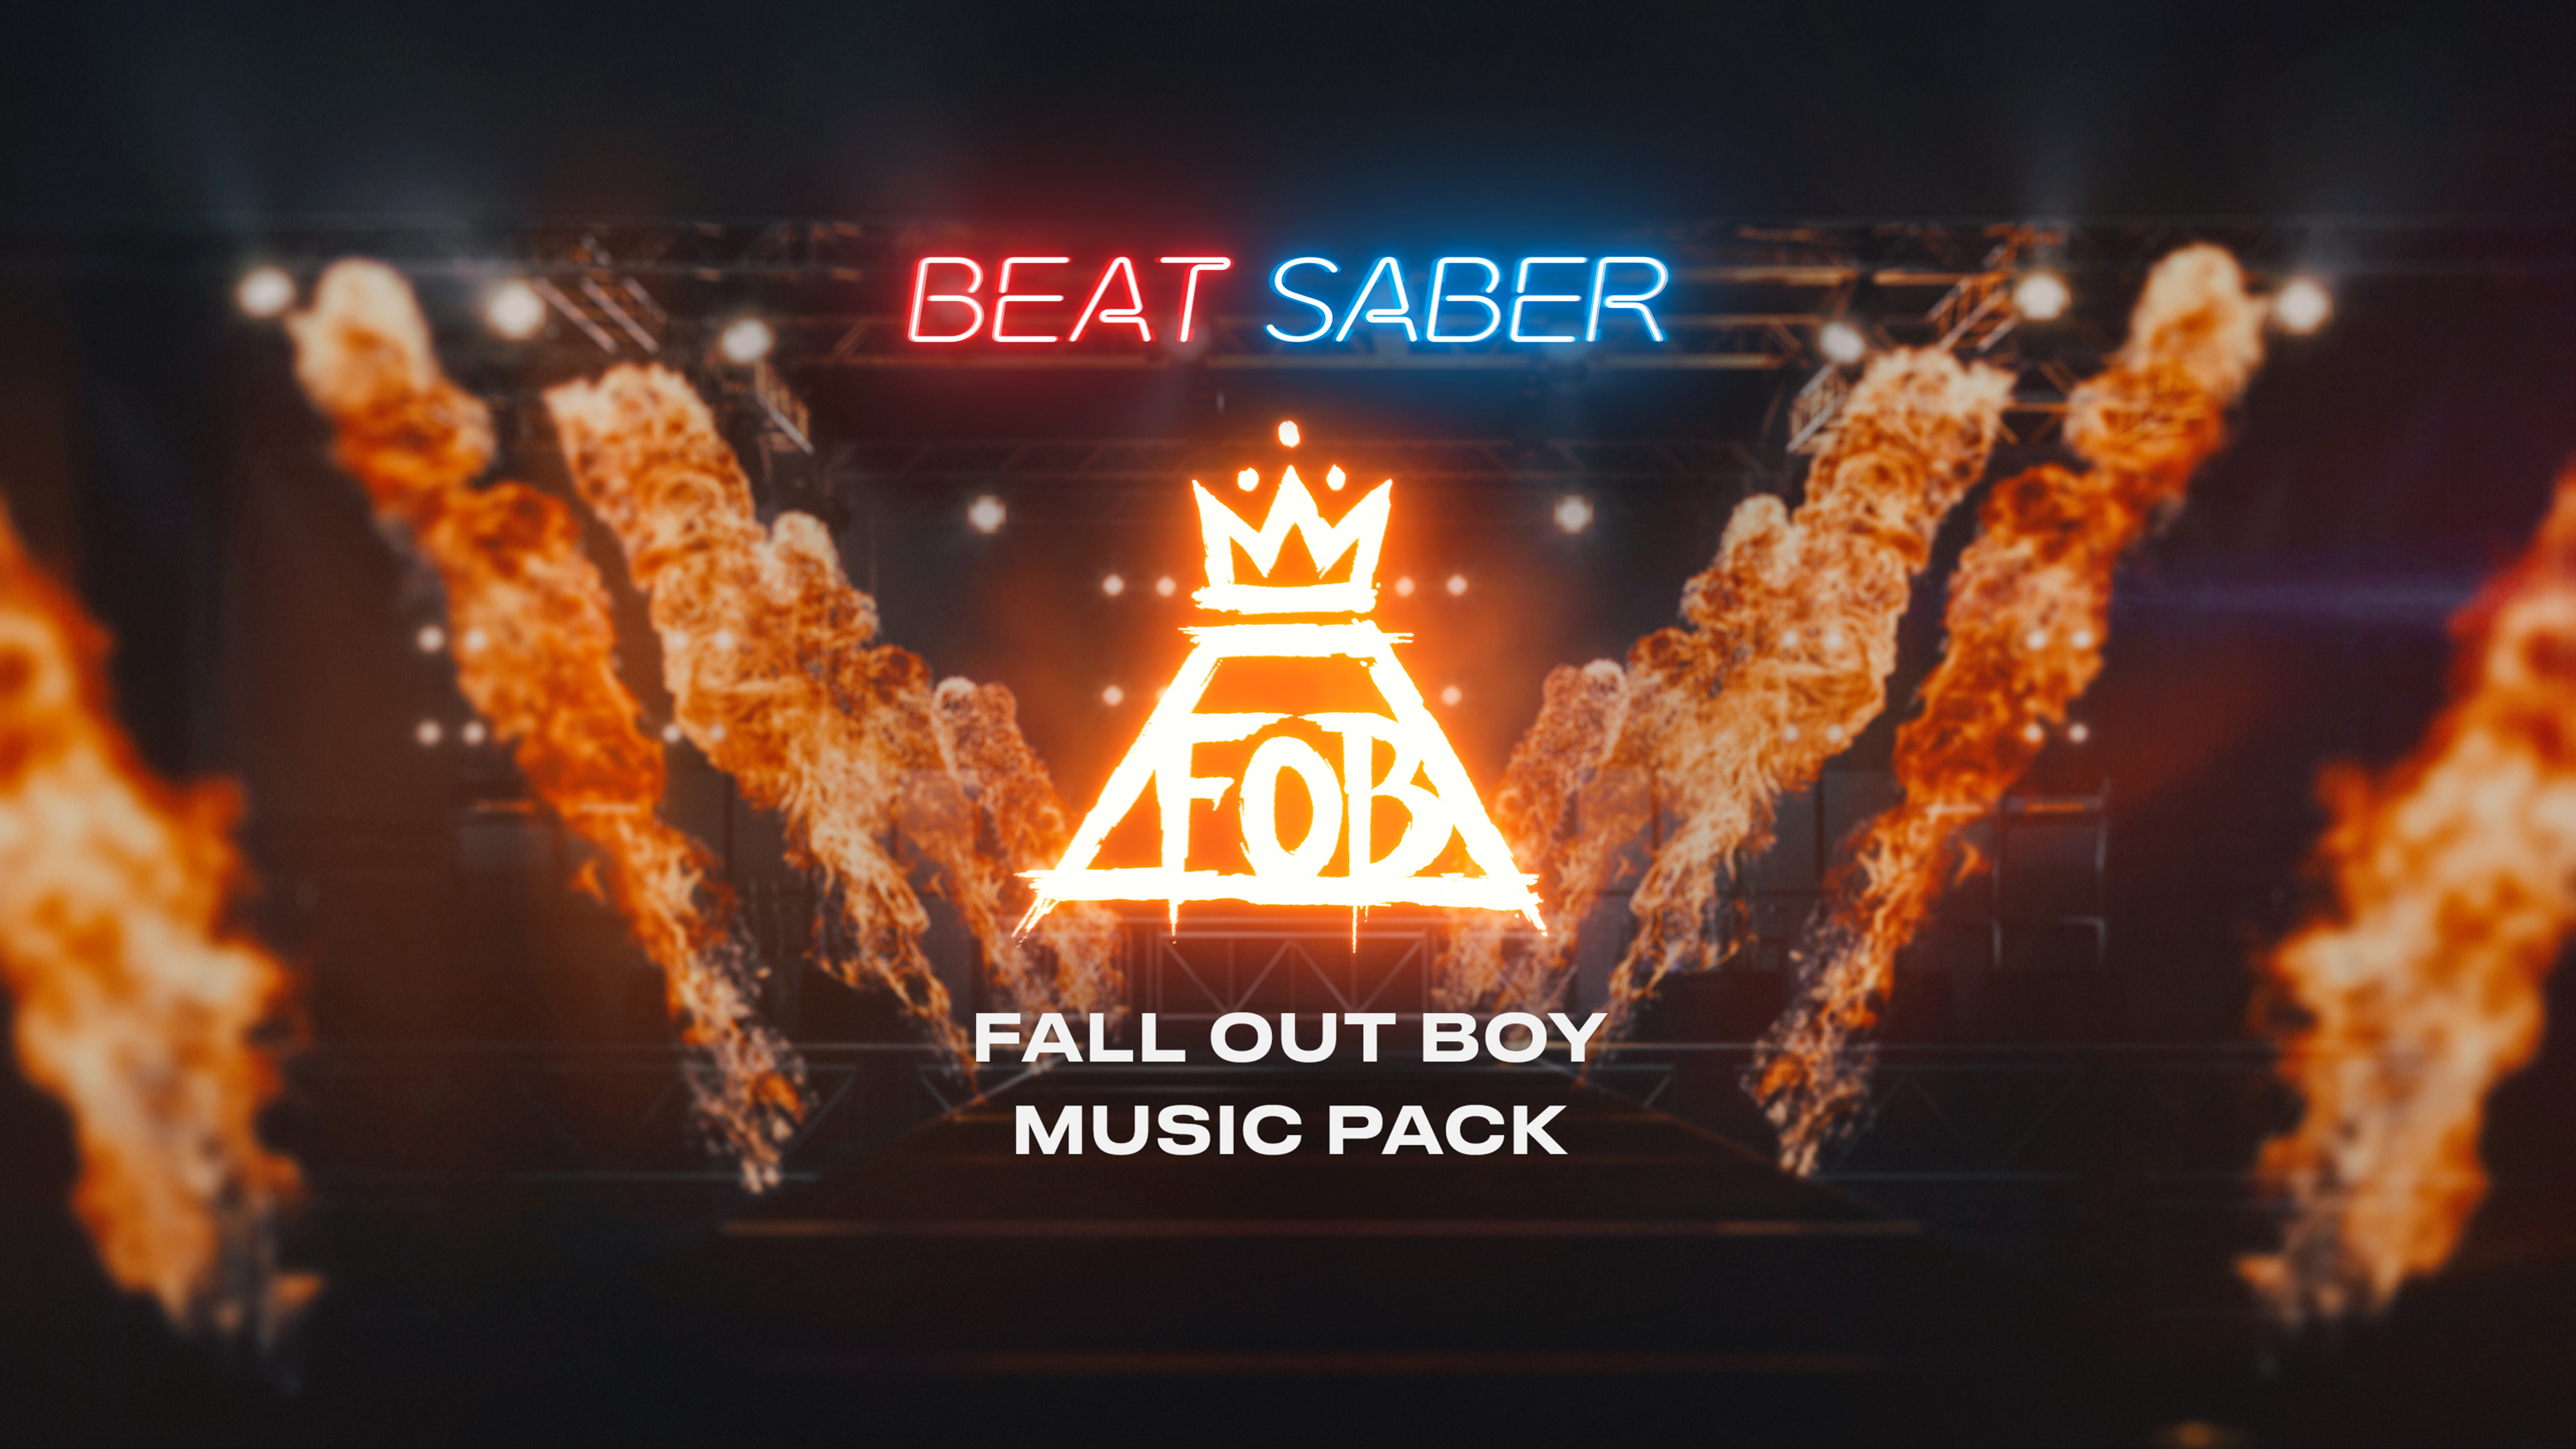 This ain't a scene, it's Fall Out Boy coming to Beat Saber on the Quest 2 TechRadar